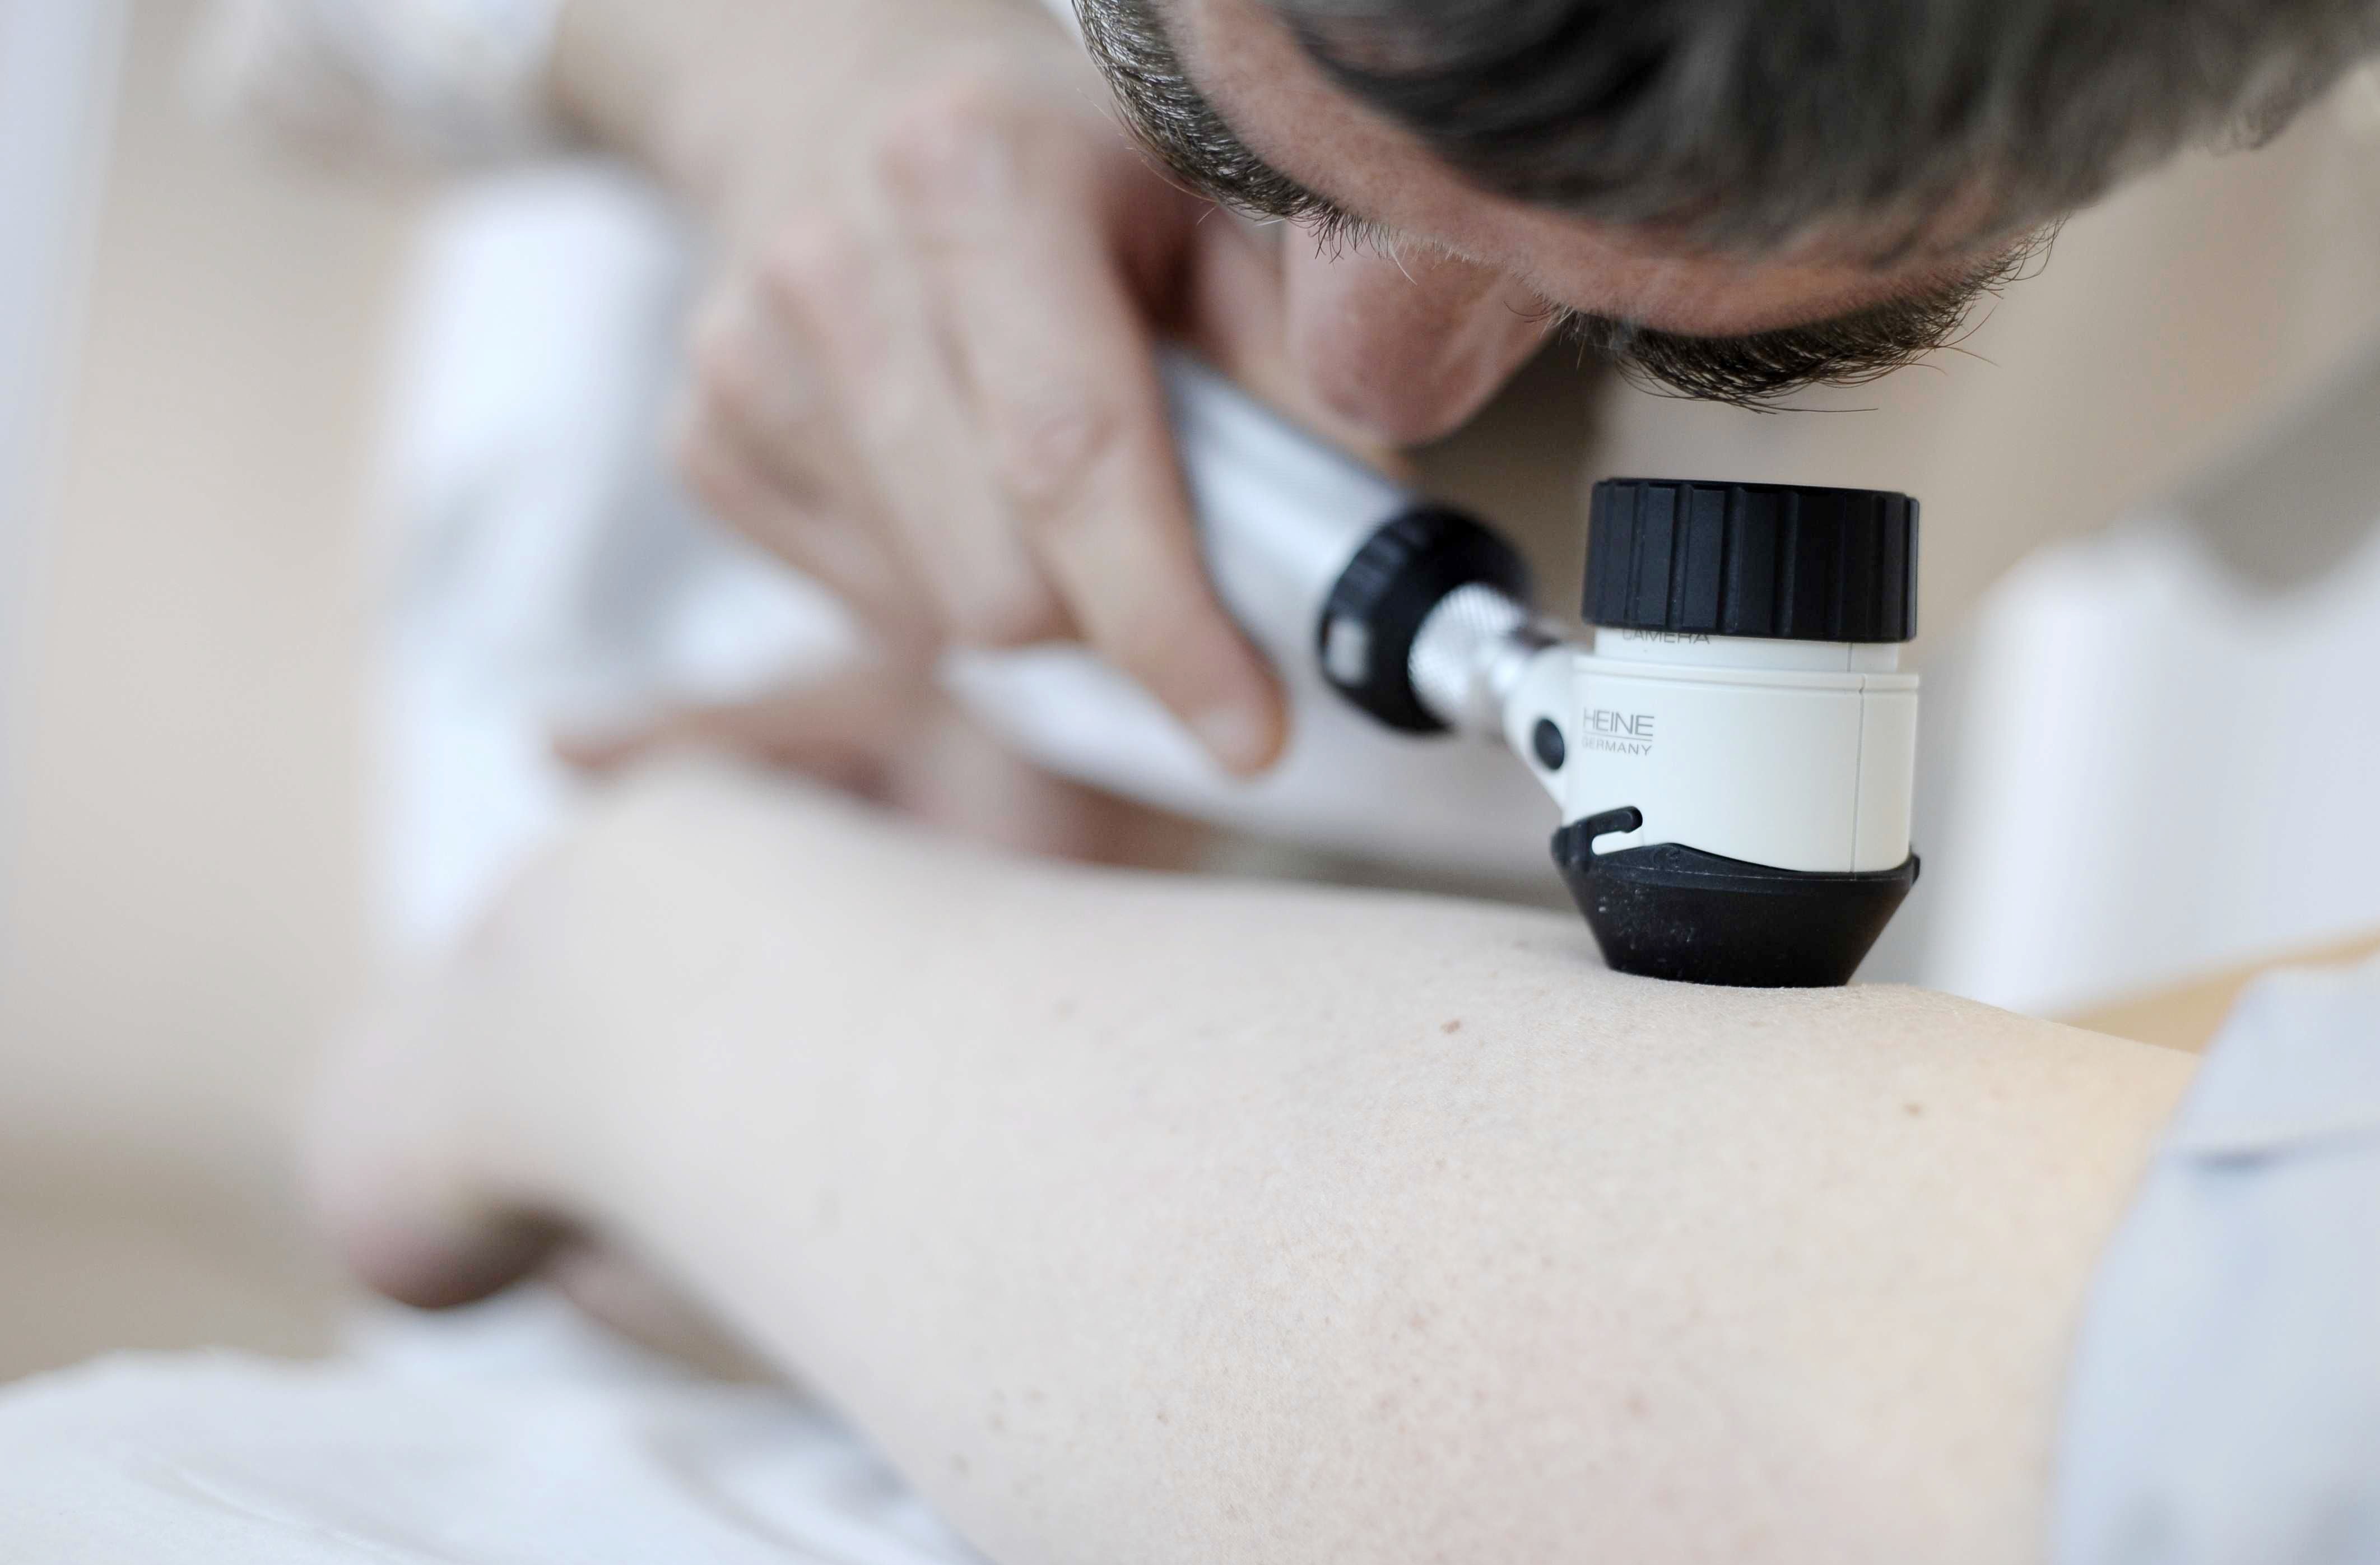 Researchers warn eleven moles on your arm could indicate skin cancer